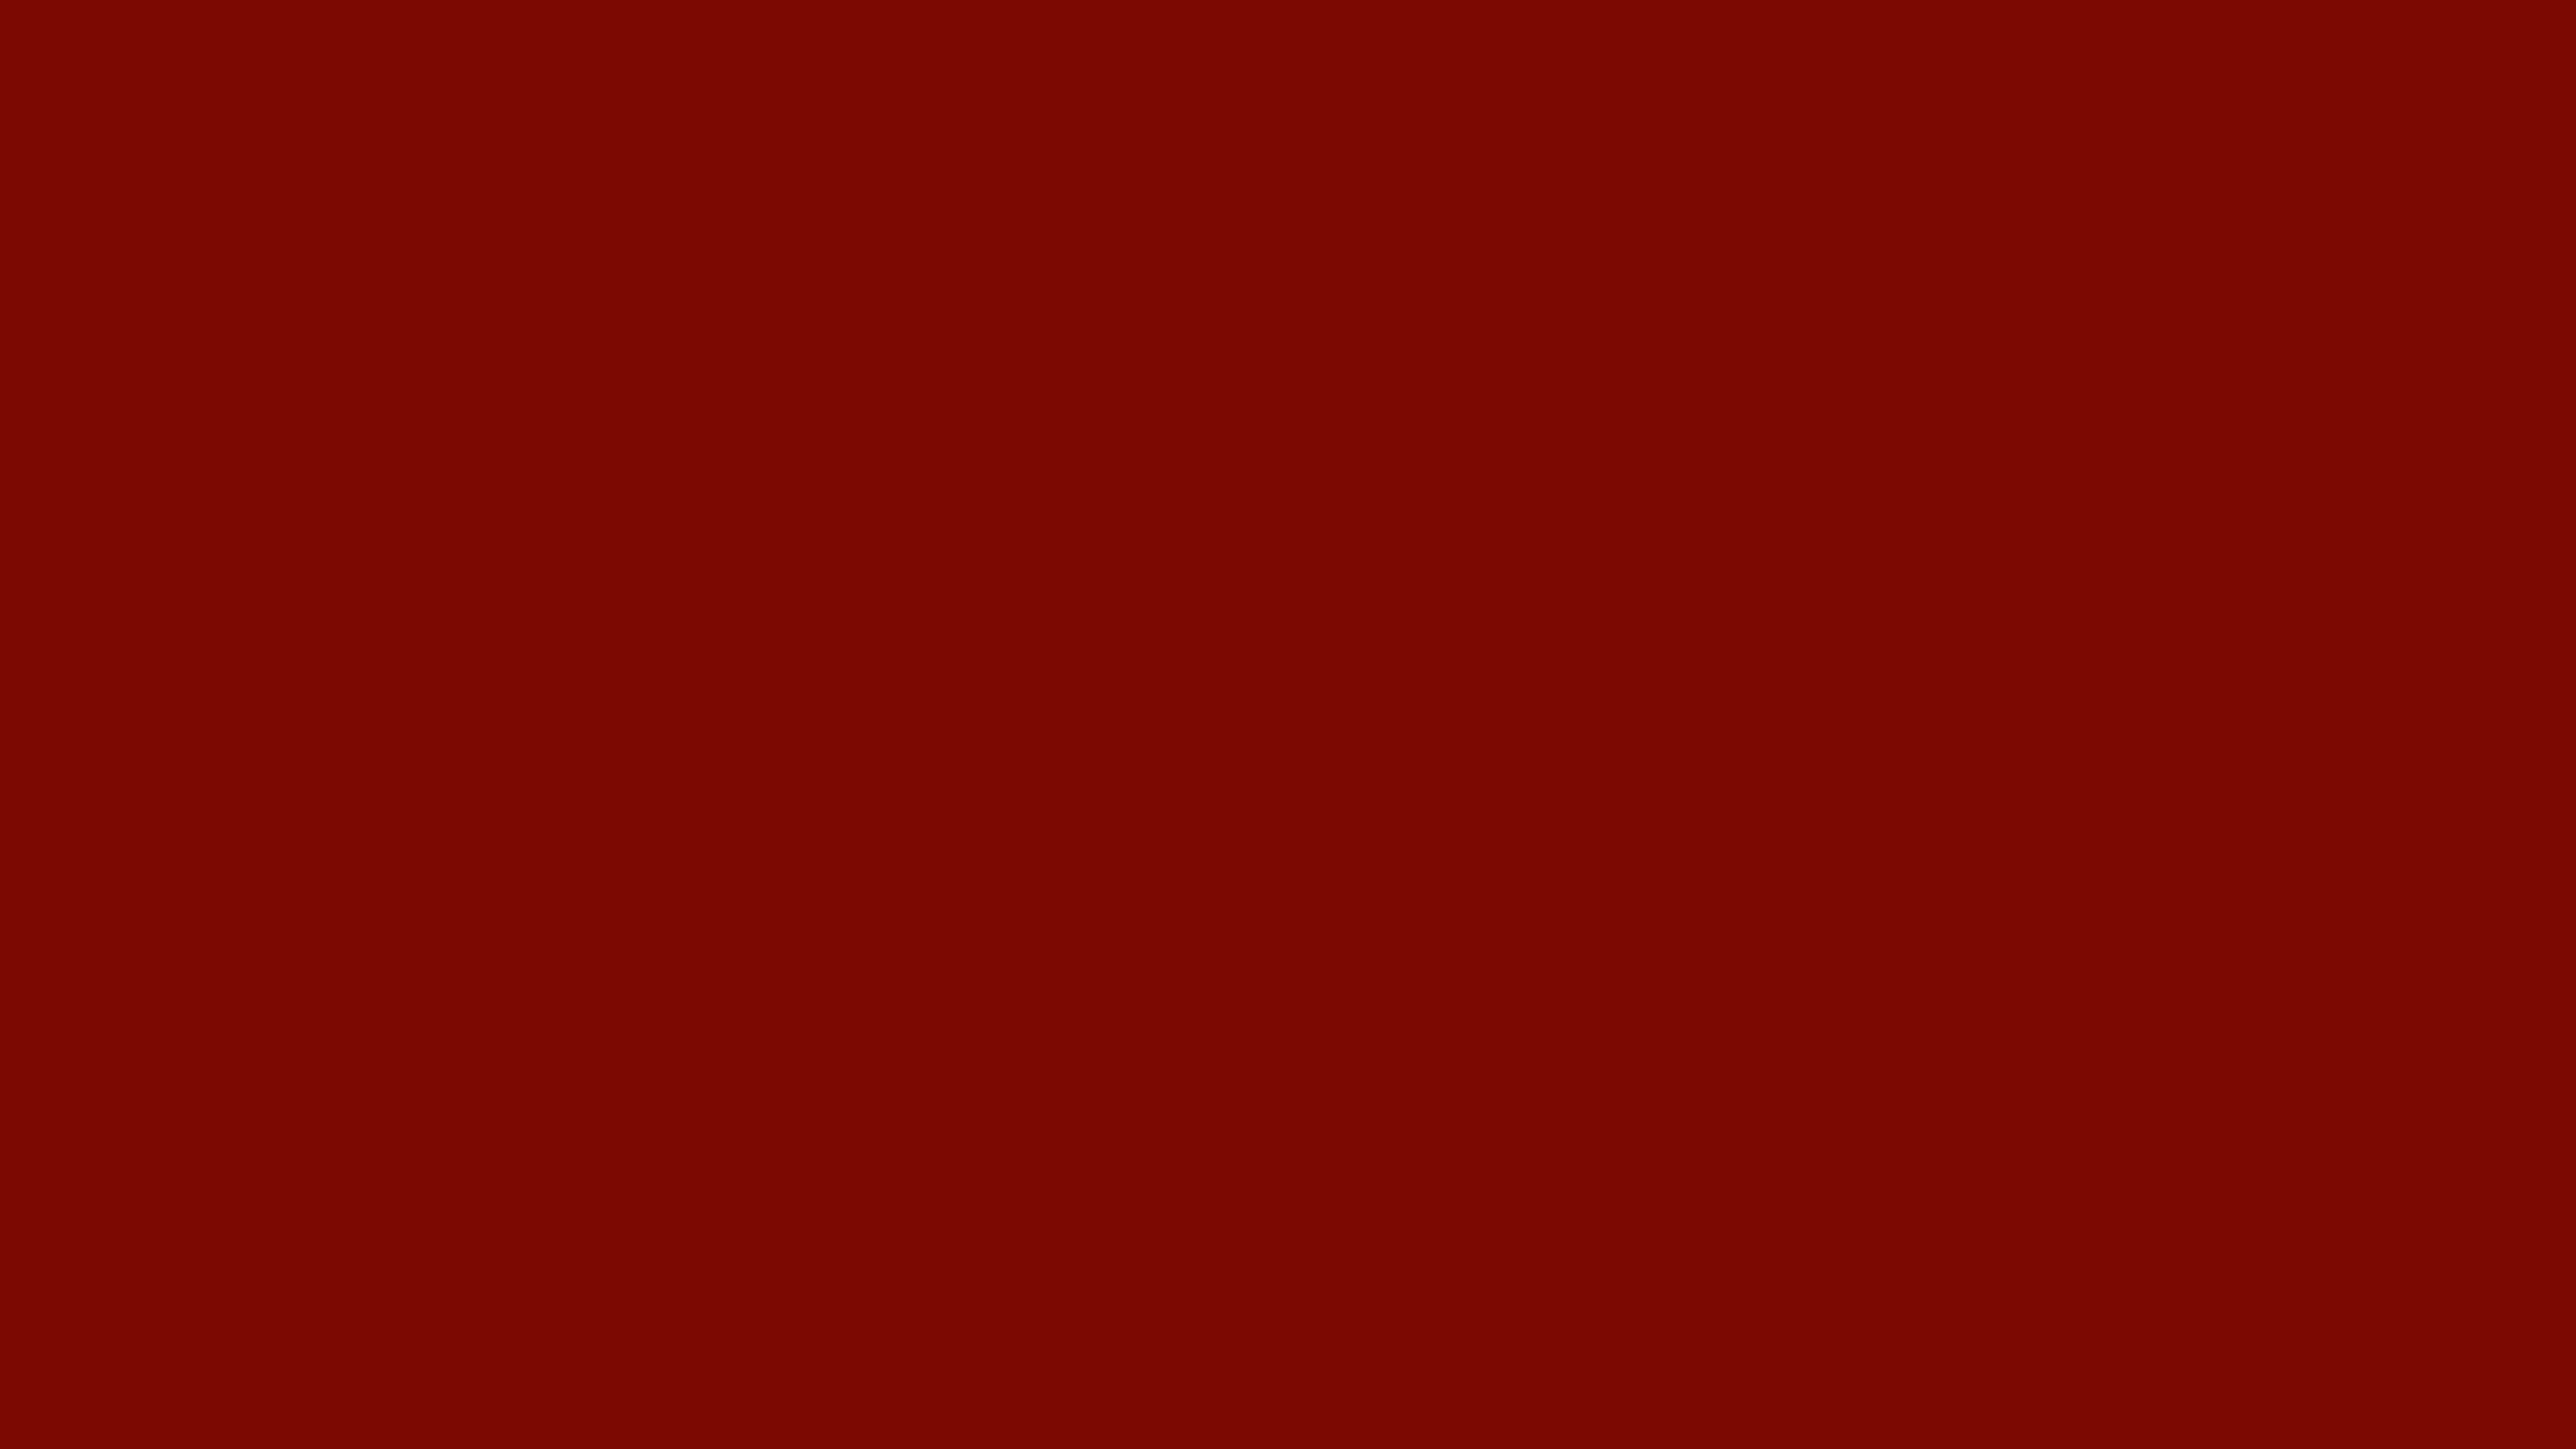 4096x2304 Barn Red Solid Color Background